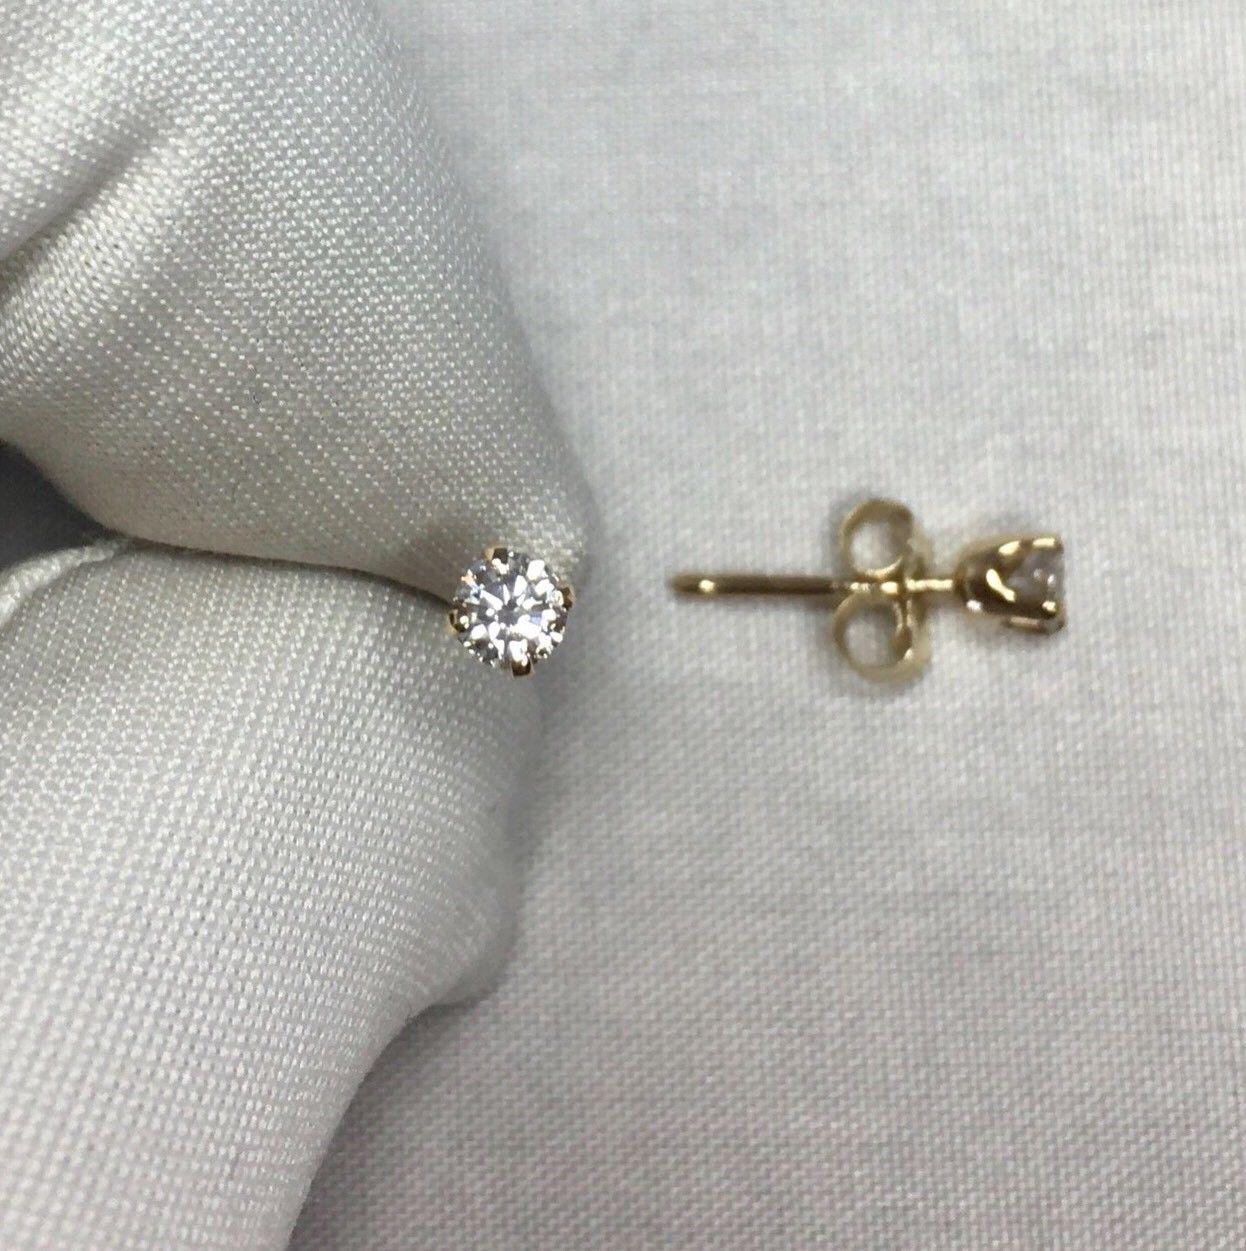 Stunning natural 3mm vivid white diamond earring studs in hallmarked 14k gold. 

0.24 carat matching pair.

F/G colour and VVS2-VS1 clarity.

Both have an excellent round cut and look stunning when the light strikes them. 
These are well matched